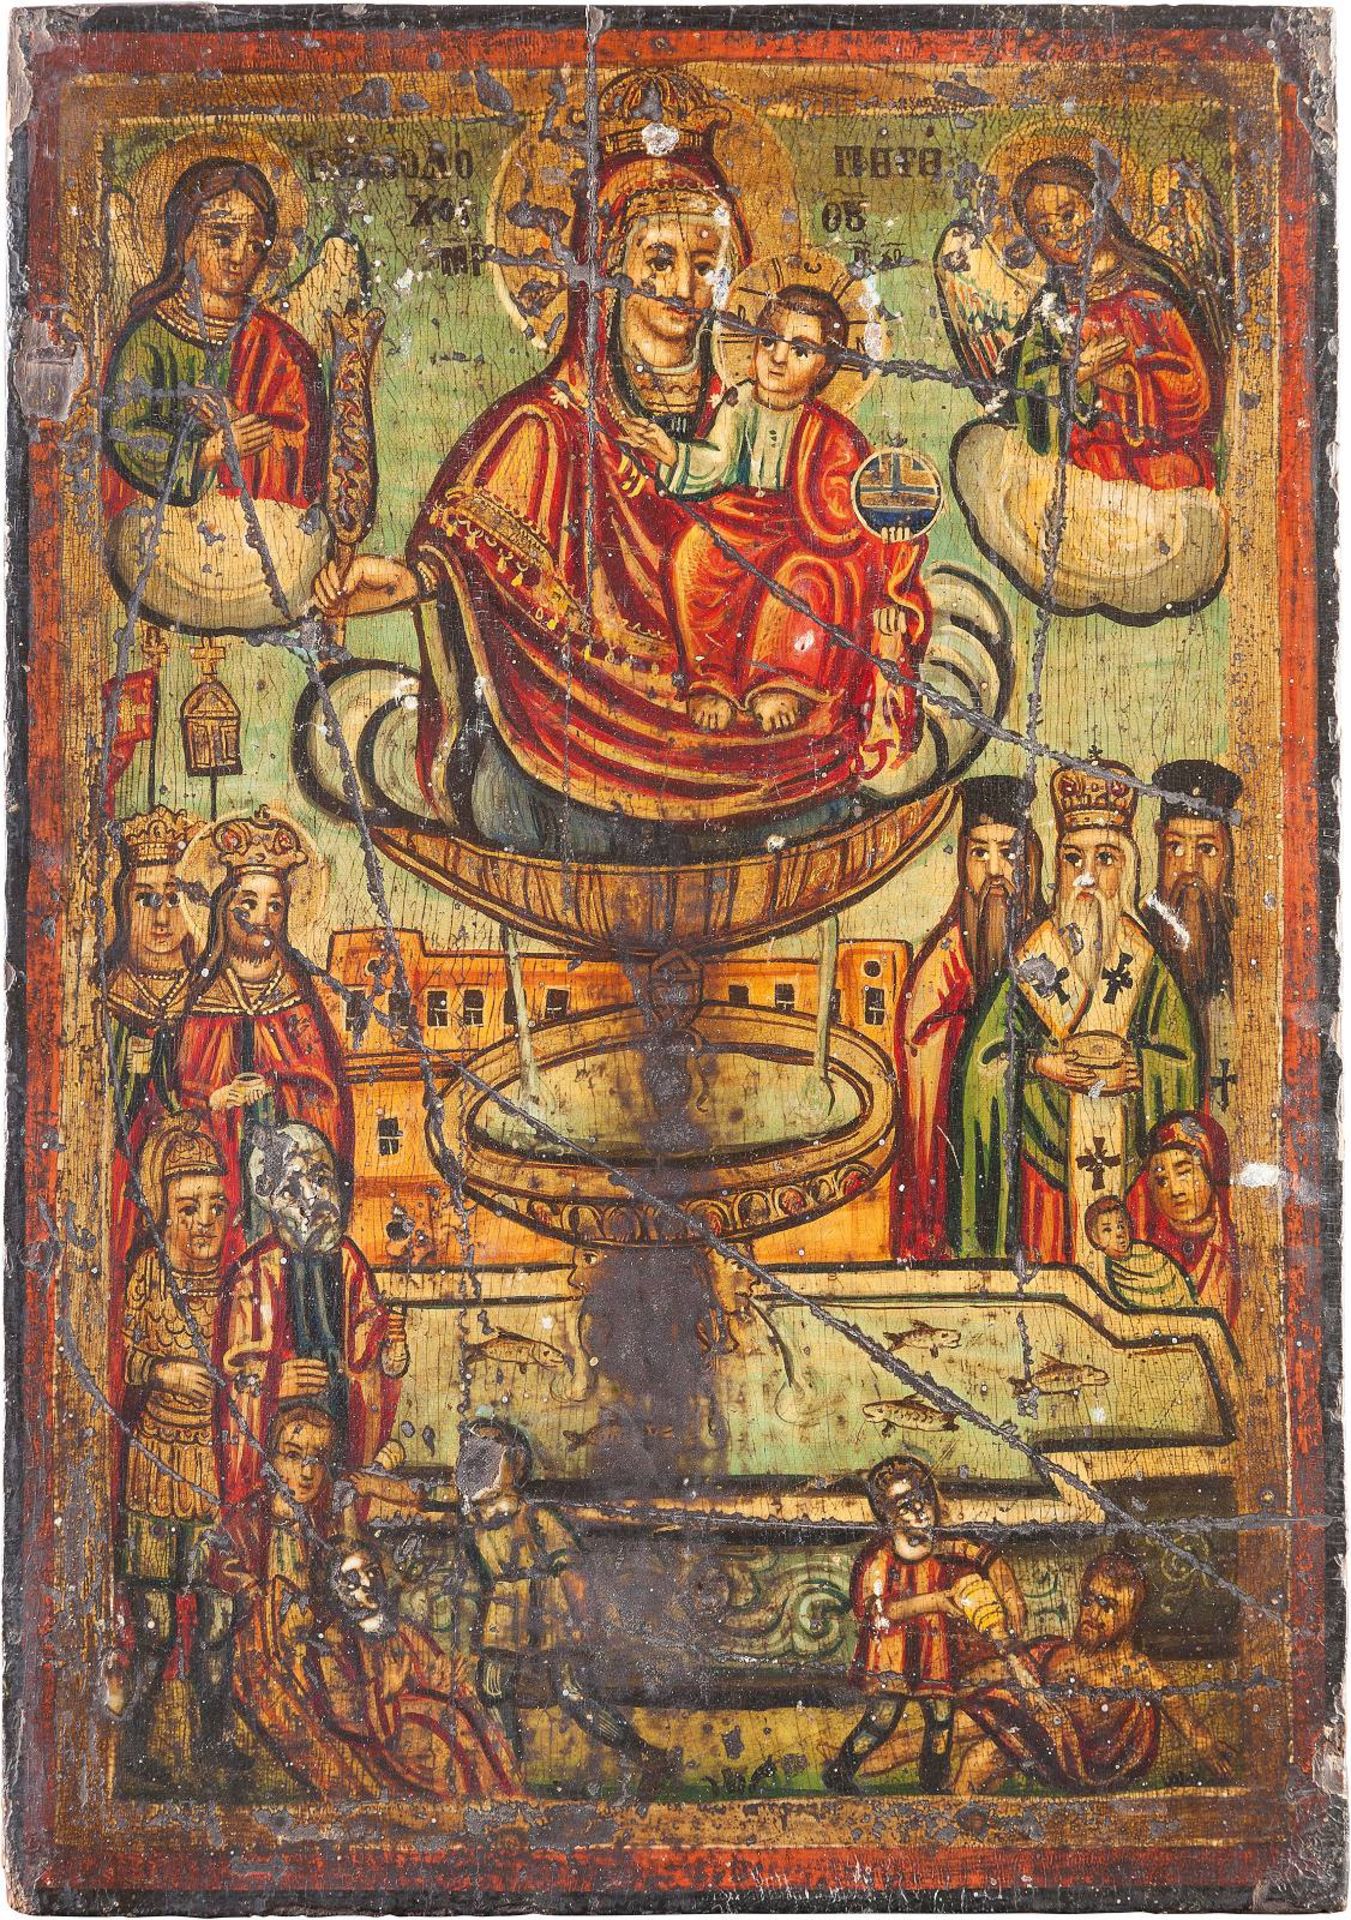 AN ICON SHOWING THE MOTHER OF GOD OF THE LIFE-GIVING SOURCEBalkan, 19th century Oil on wood panel.